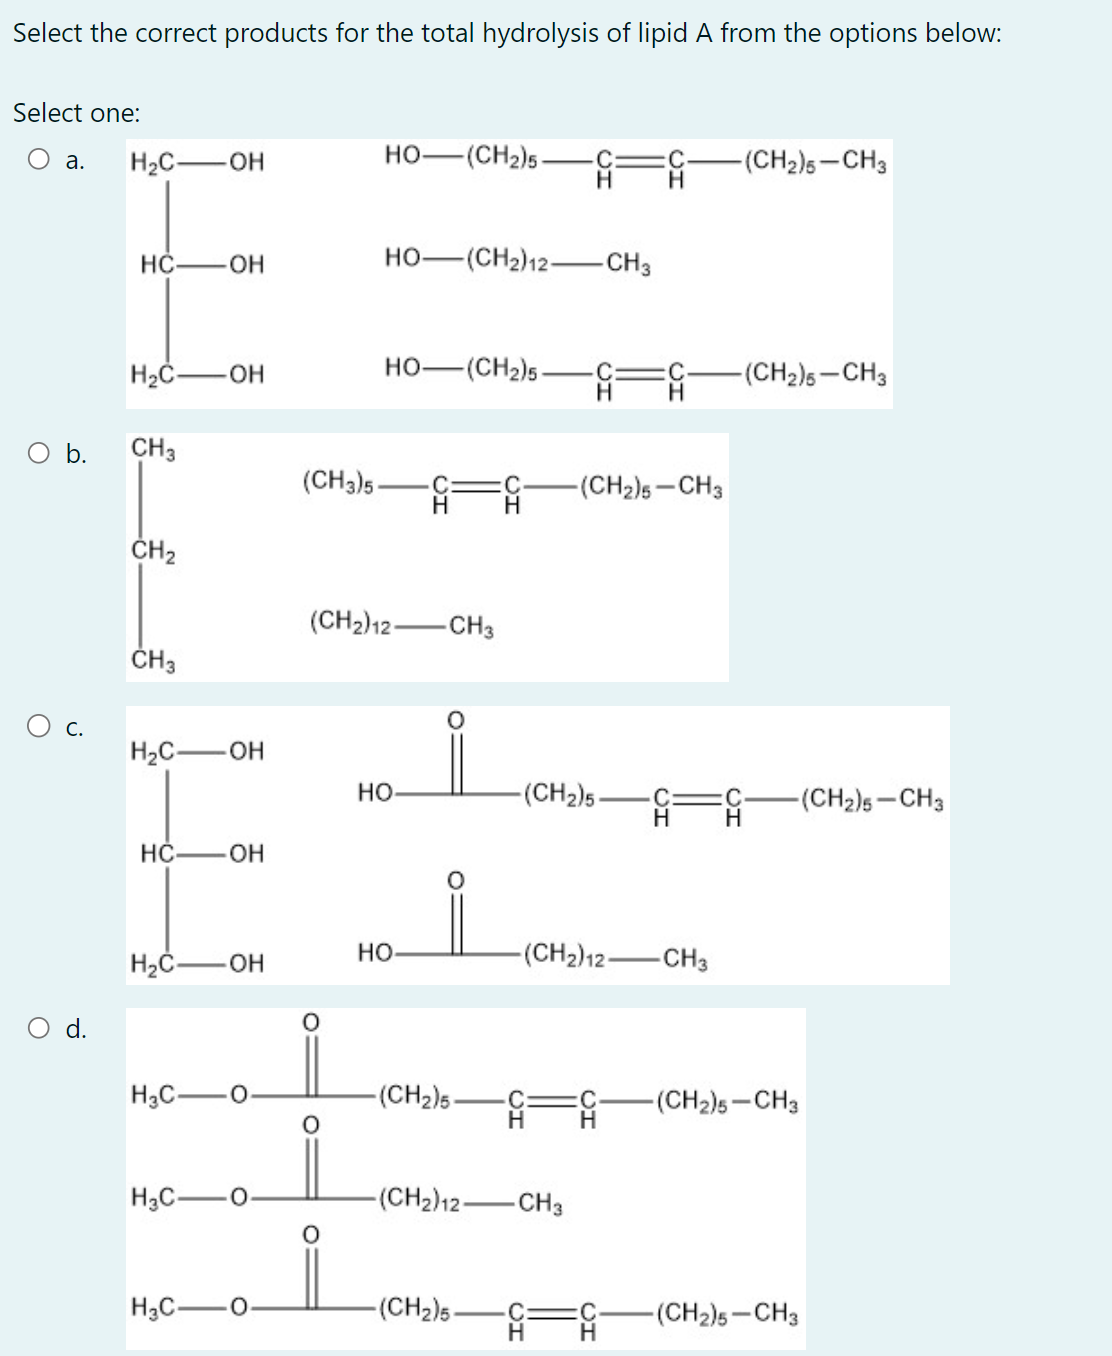 Select the correct products for the total hydrolysis of lipid A from the options below:
Select one:
a. H₂C-OH
O b.
O C.
O d.
HC-OH
H₂C-OH
CH3
CH₂
CH3
H₂C-OH
HC-OH
H₂C-OH
HỌ—(CH2)5.
H₂C-
HỌ—(CH2)12—CH3
HO—(CH2)5.
(CH3)5- -G=G -(CH₂)5-CH3
H
(CH2) 12-CH3
HO
HO
-(CH₂)5
H₂C-
-(CH₂)5- -C
#
H₂C-
-(CH₂)12-CH3
-(CH₂)5-
-(CH2) 12-CH3
H
:C
H
-(CH₂)5-CH3
-(CH₂)5-CH3
-(CH₂)5-CH3
-(CH₂)5-CH3
-(CH₂)5-CH3